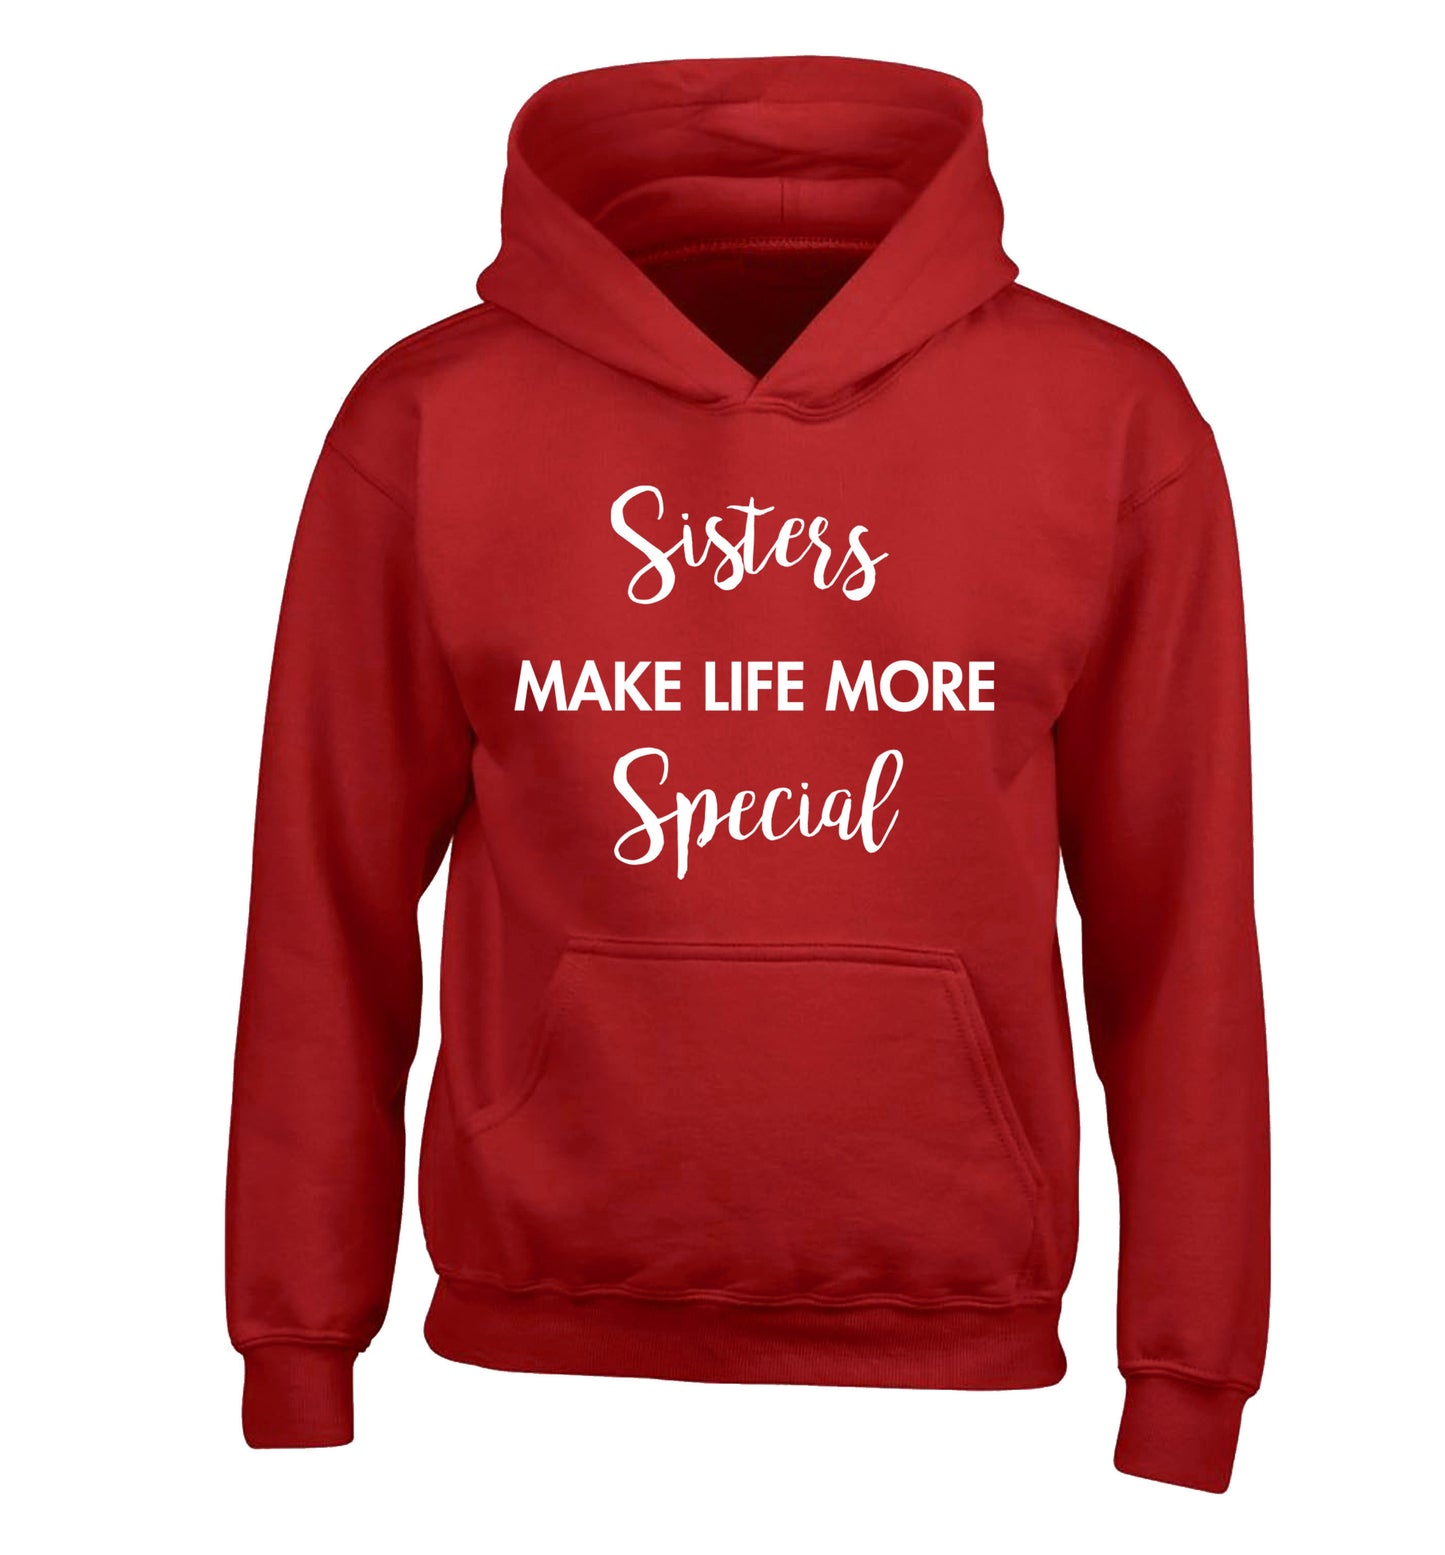 Sisters make life more special children's red hoodie 12-14 Years